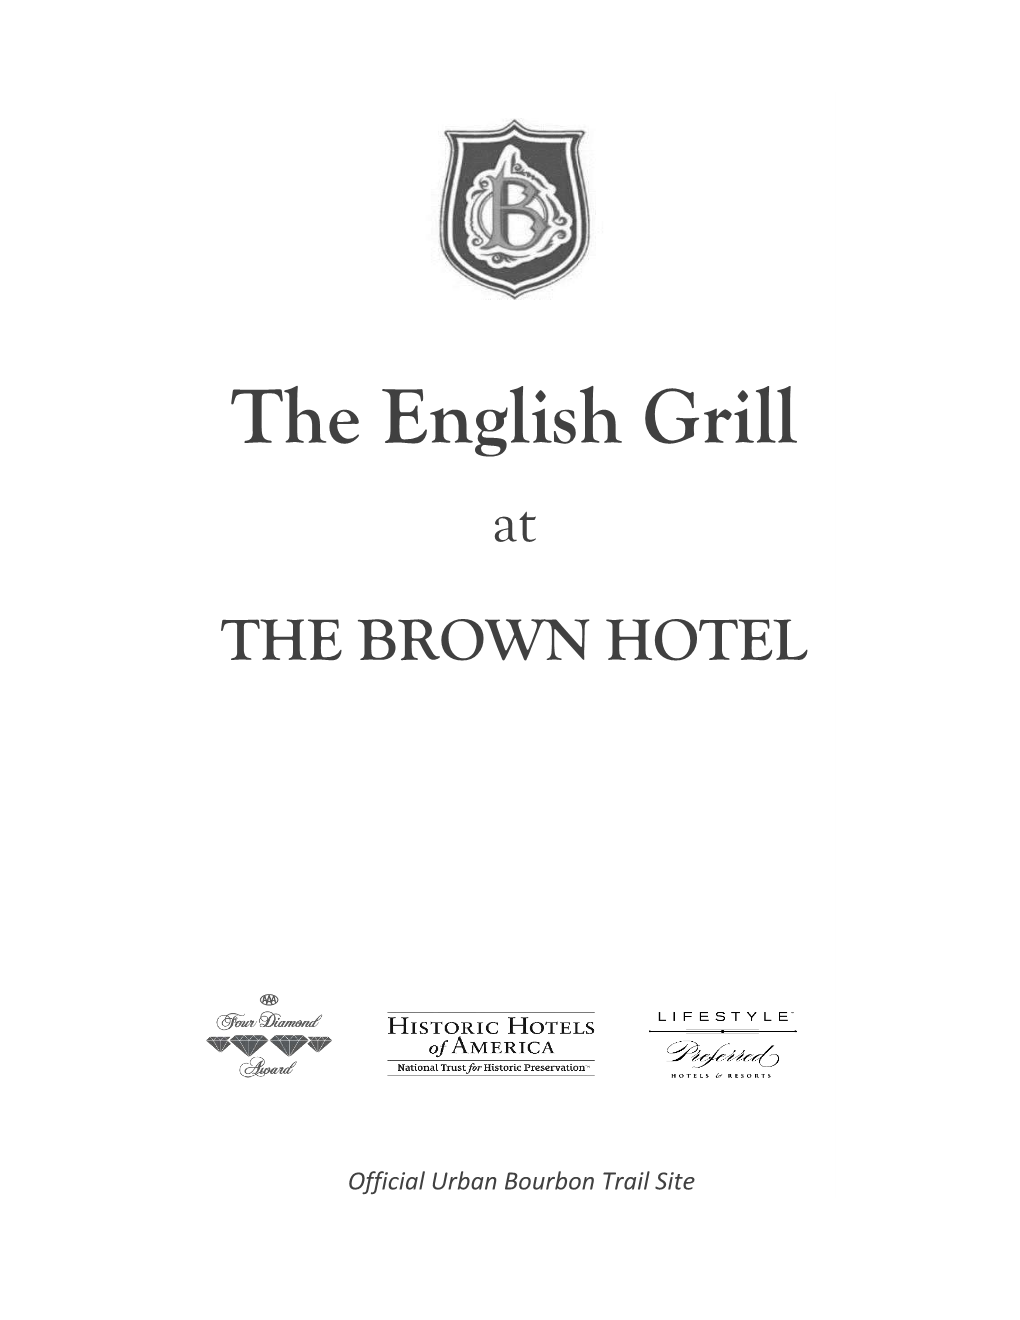 The English Grill at the BROWN HOTEL